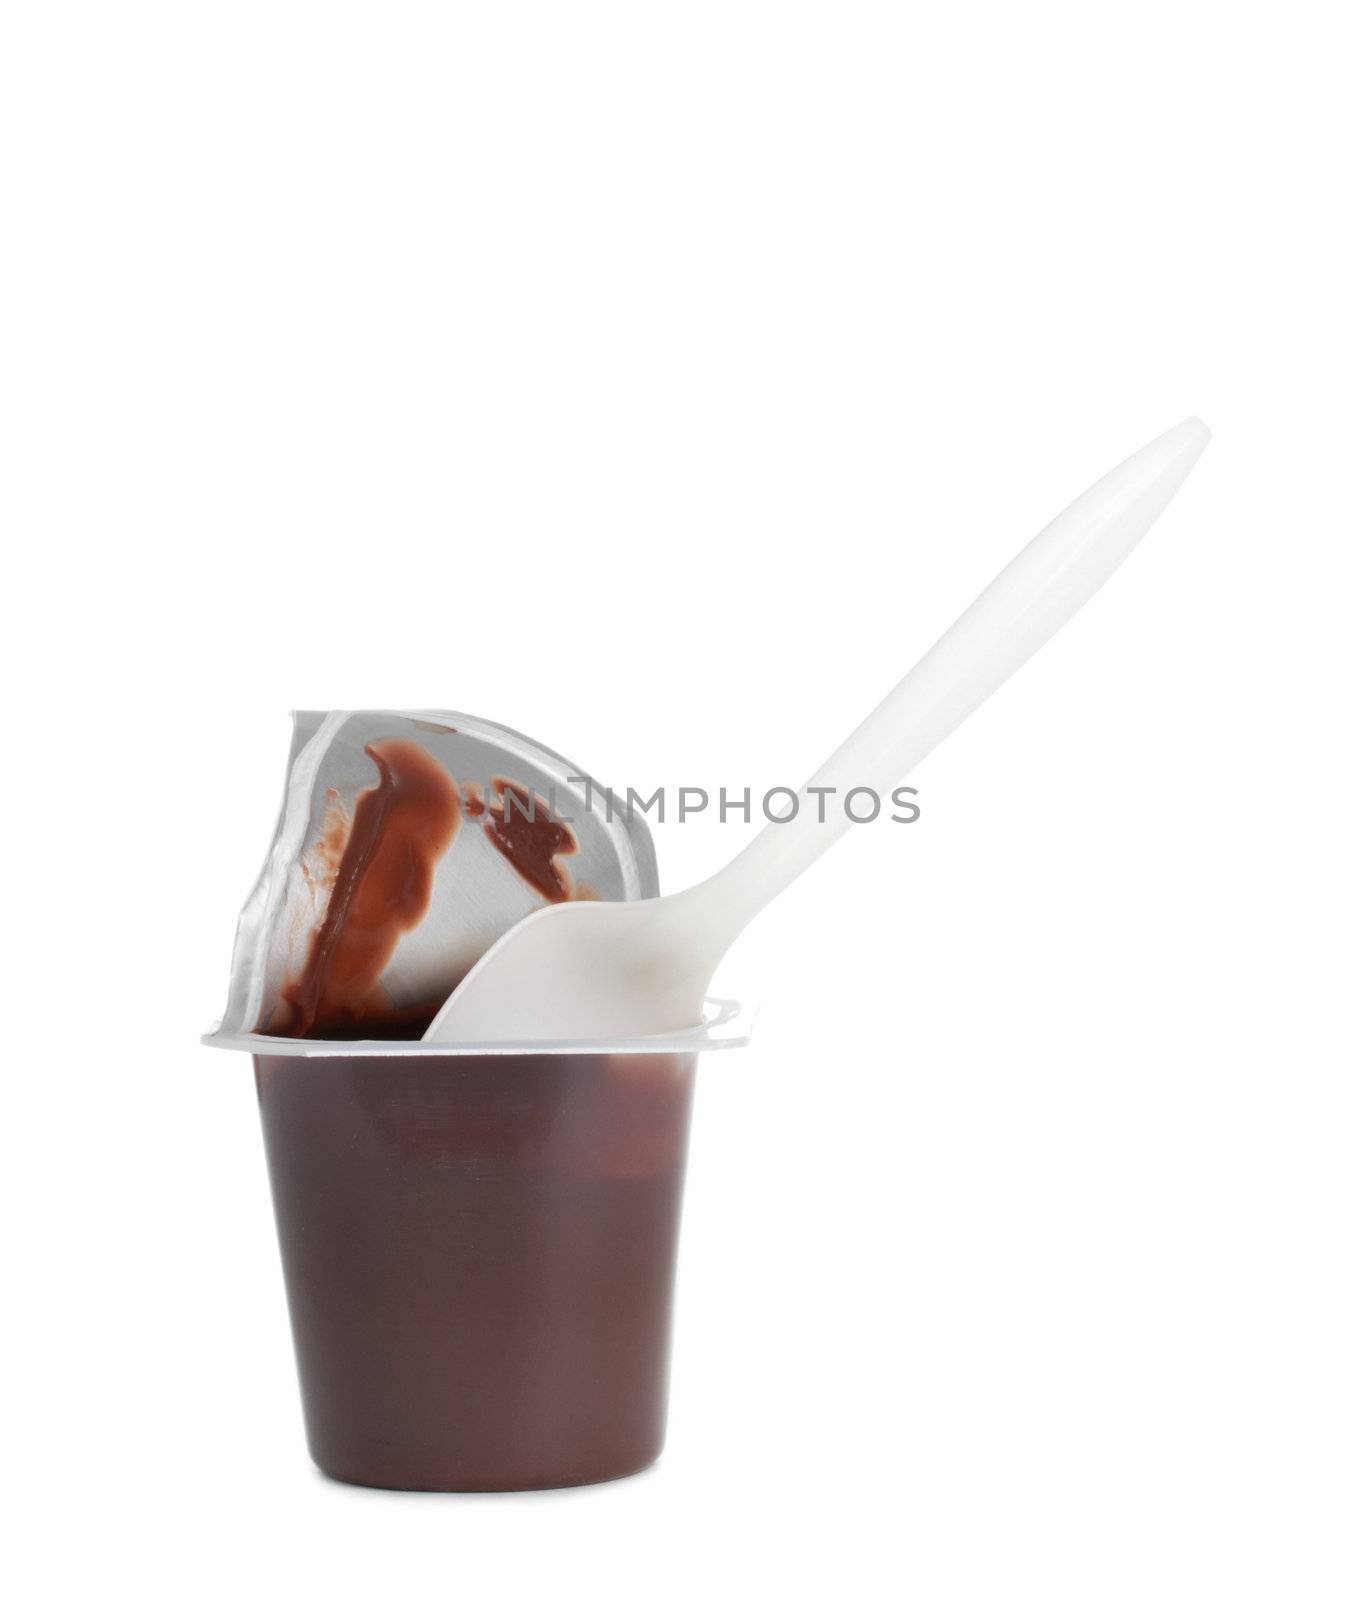 single portion of chocolate pudding, isolated on white